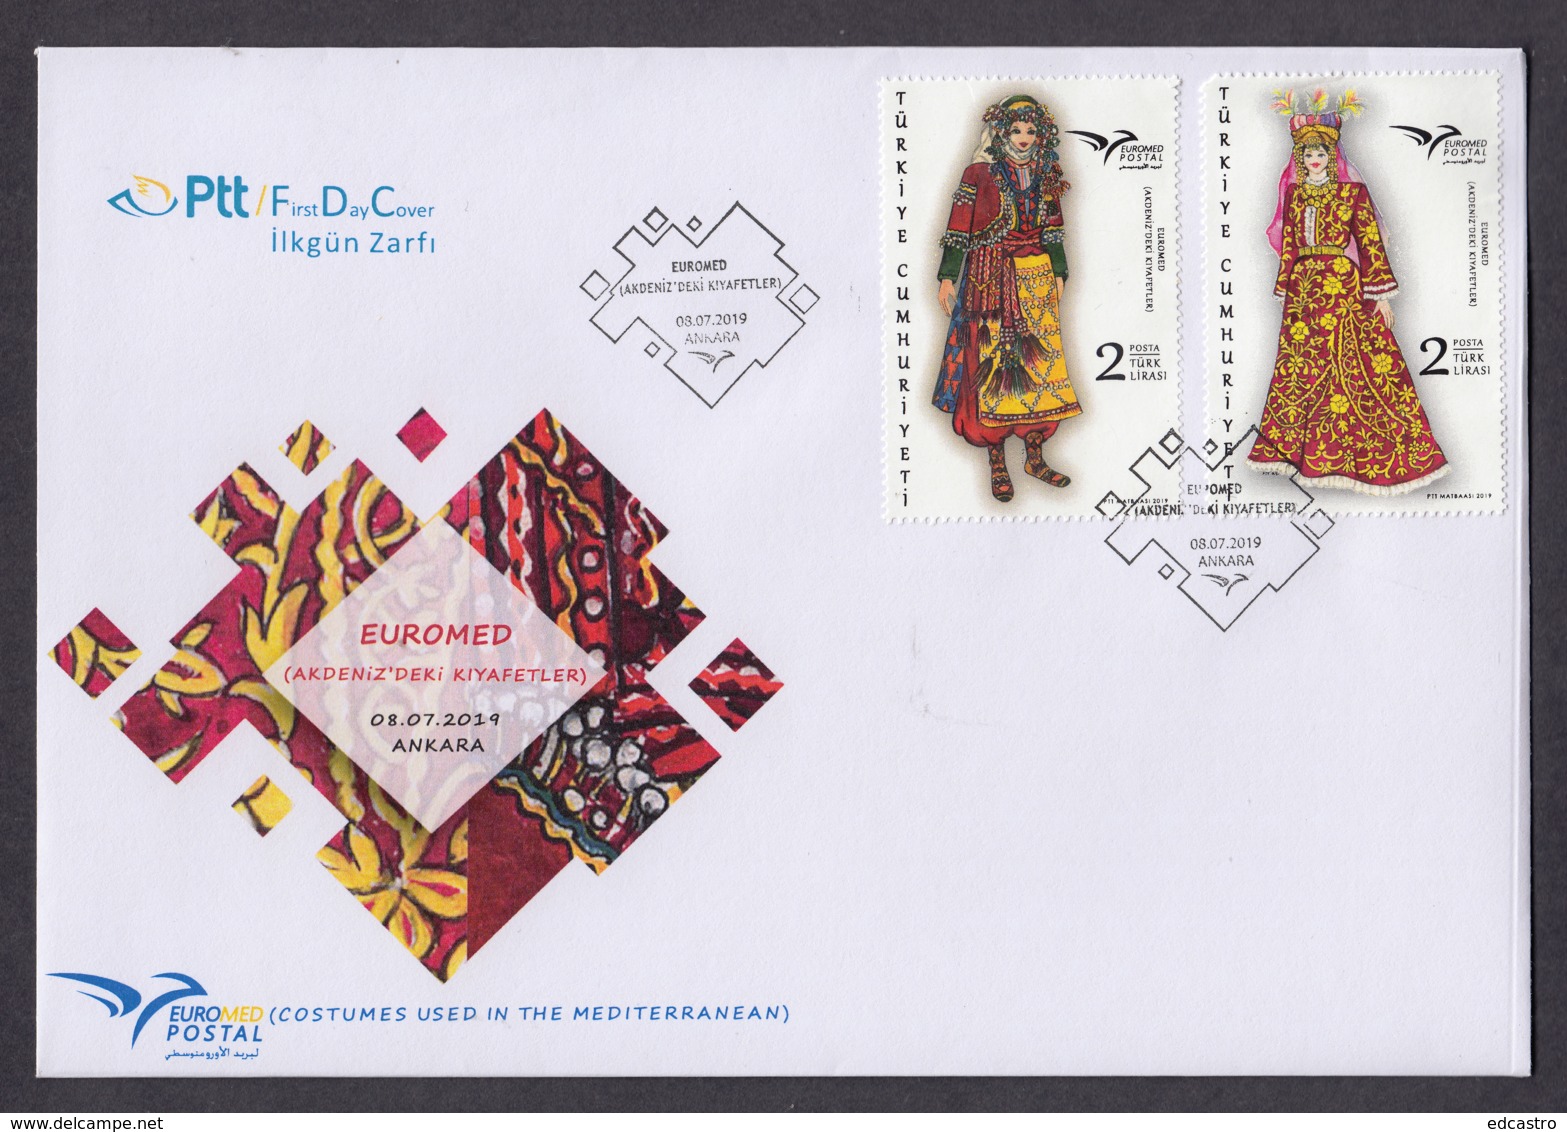 47.- TURKEY 2019 FDC EUROMED   (CLOTHING IN THE MEDITERRANEAN) - Emisiones Comunes